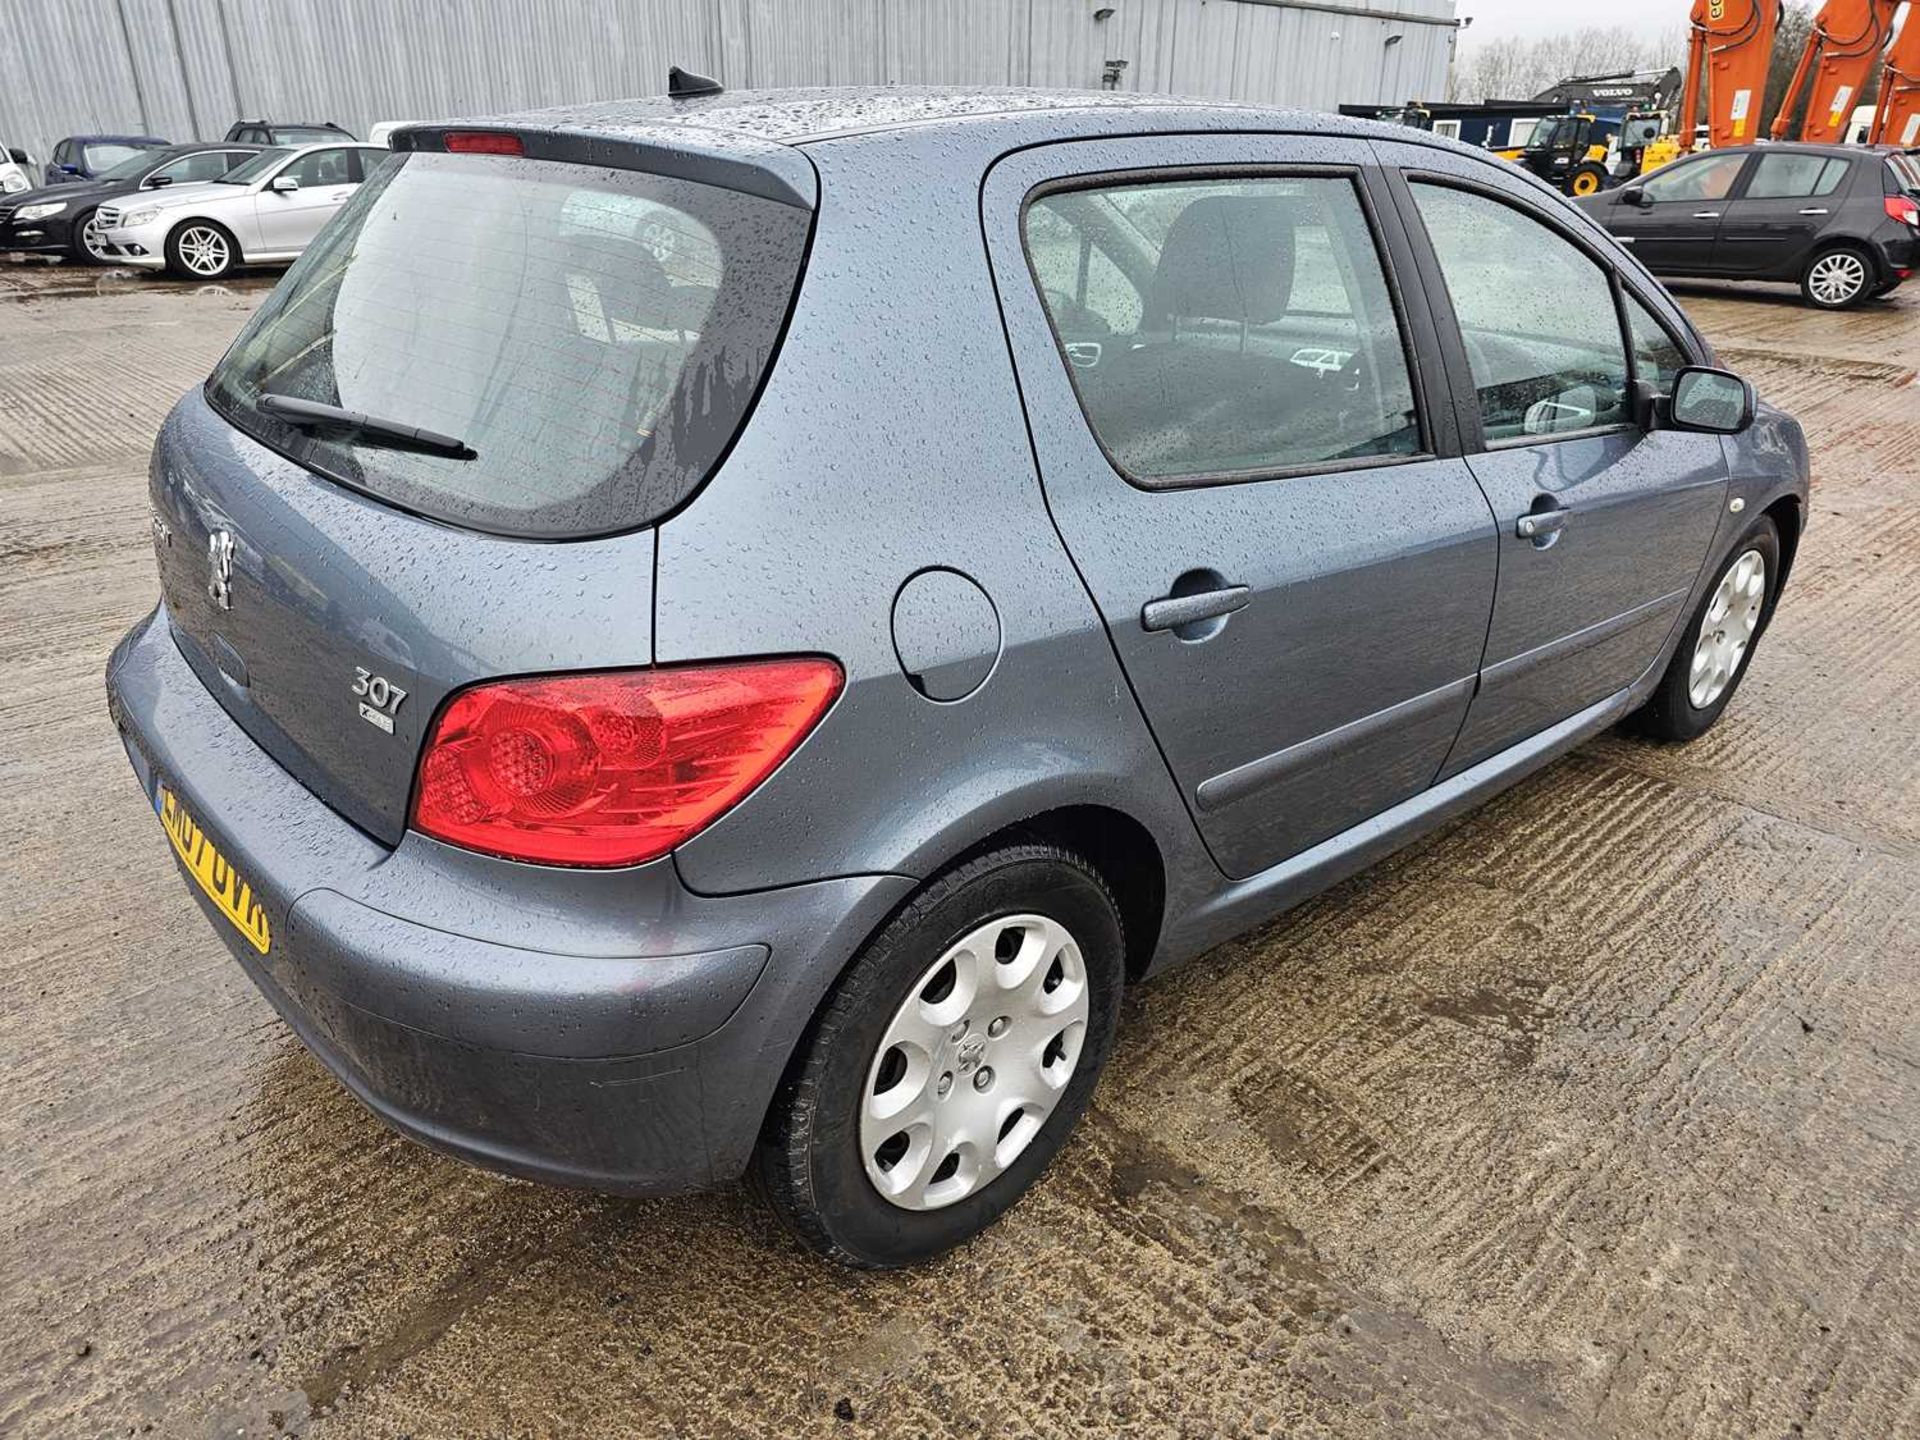 2007 Peugeot 307 X-line, 5 Speed, A/C (Reg. Docs. Available, Tested 11/24) - Image 3 of 28